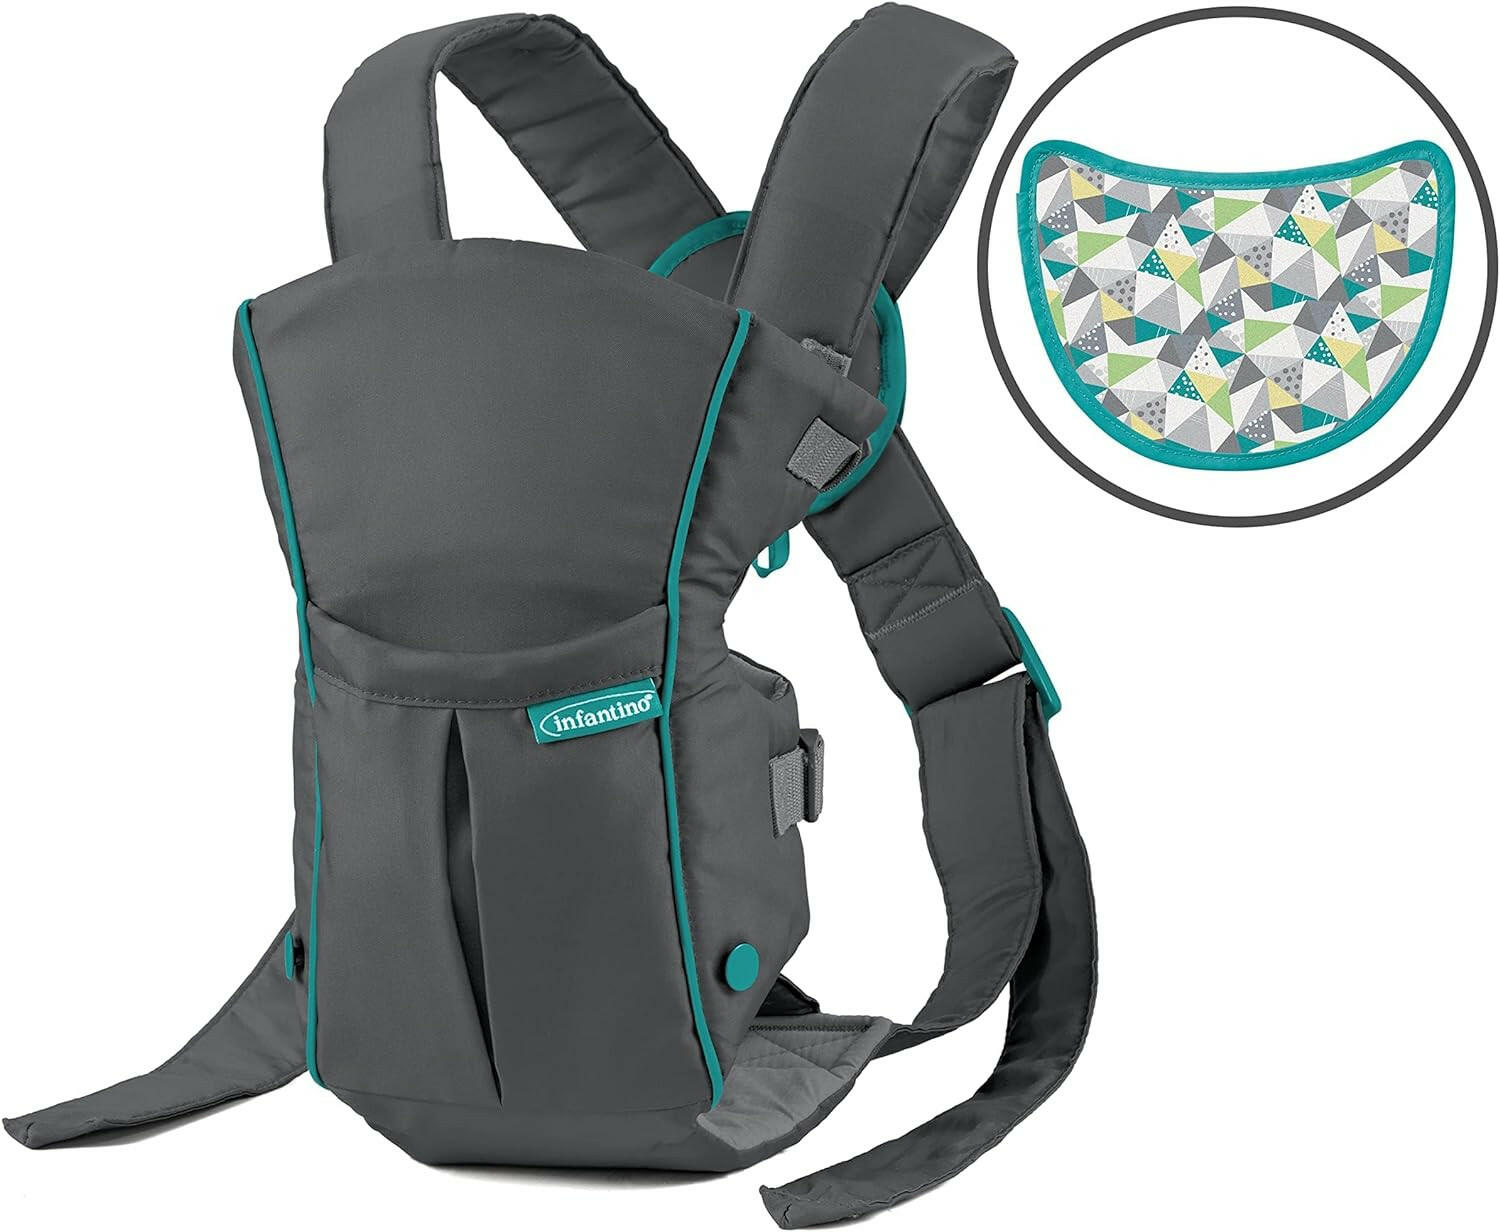 Infantino Swift Classic Carrier with Pocket - 2 Ways to Carry Grey Carrier with Wonder Bib & Essentials Storage Front Pocket, Adjustable Back Strap, Inside & Outward Facing, Easy to Clean Material